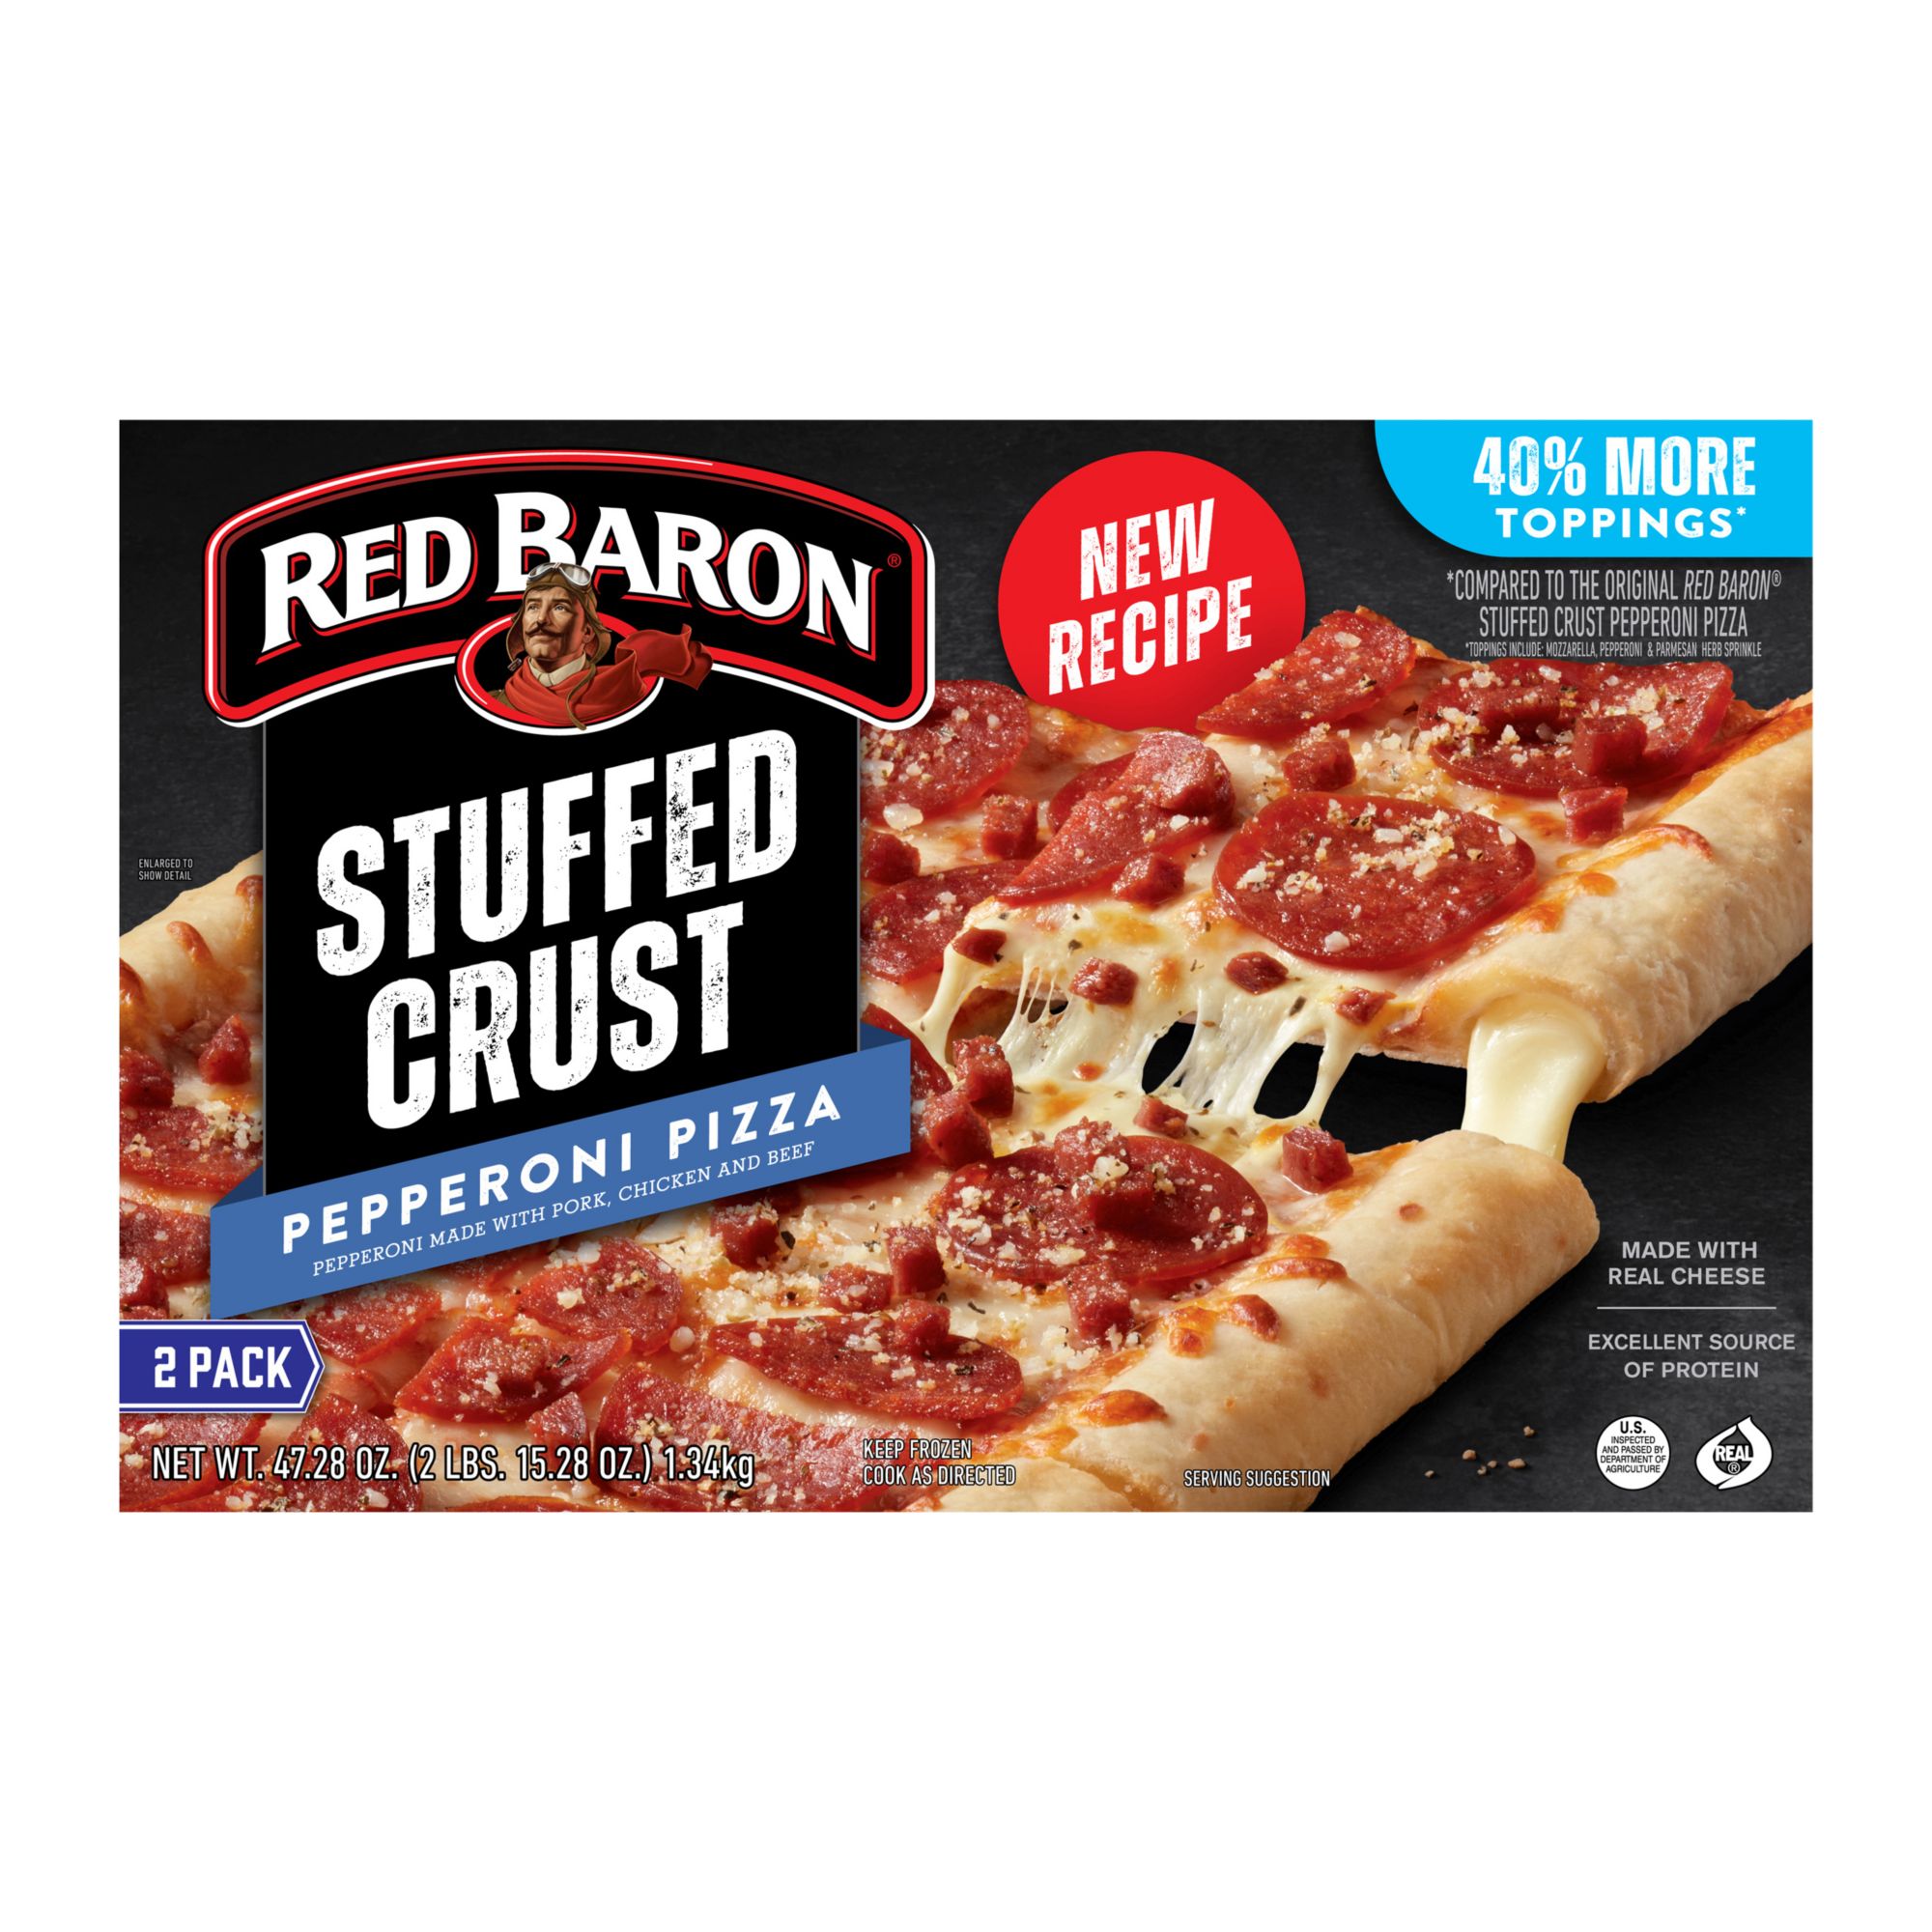 Red Baron French Bread Pepperoni Pizza